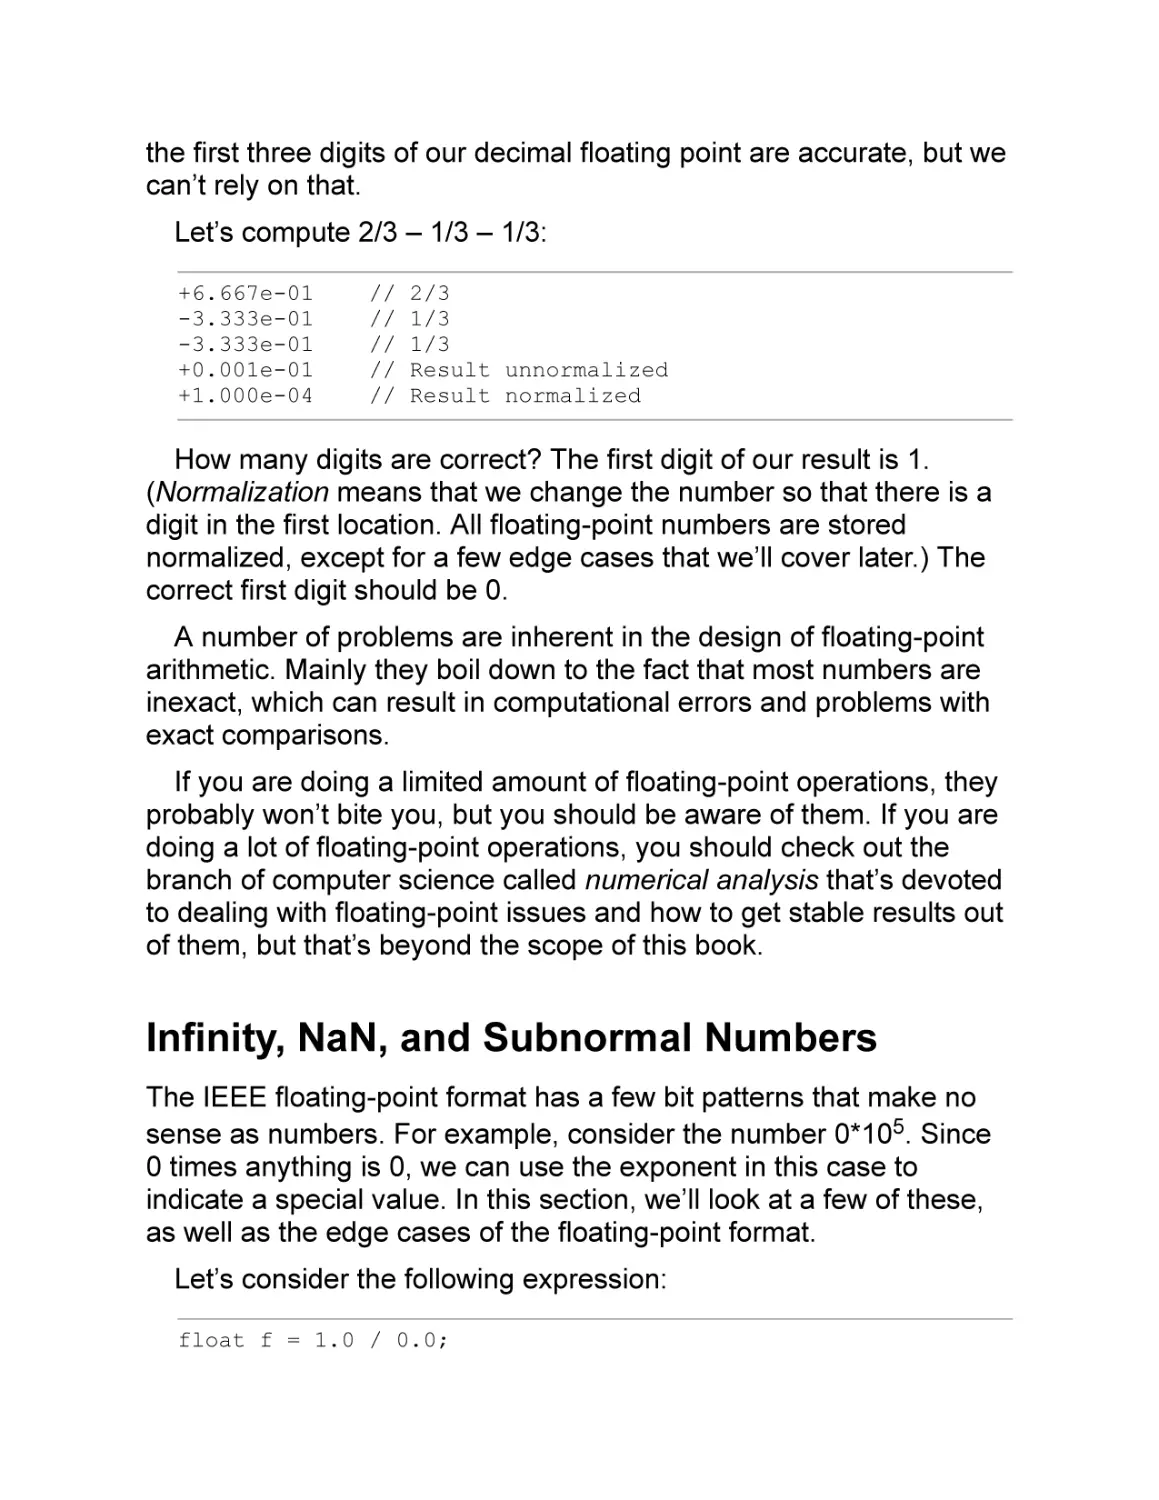 Infinity, NaN, and Subnormal Numbers